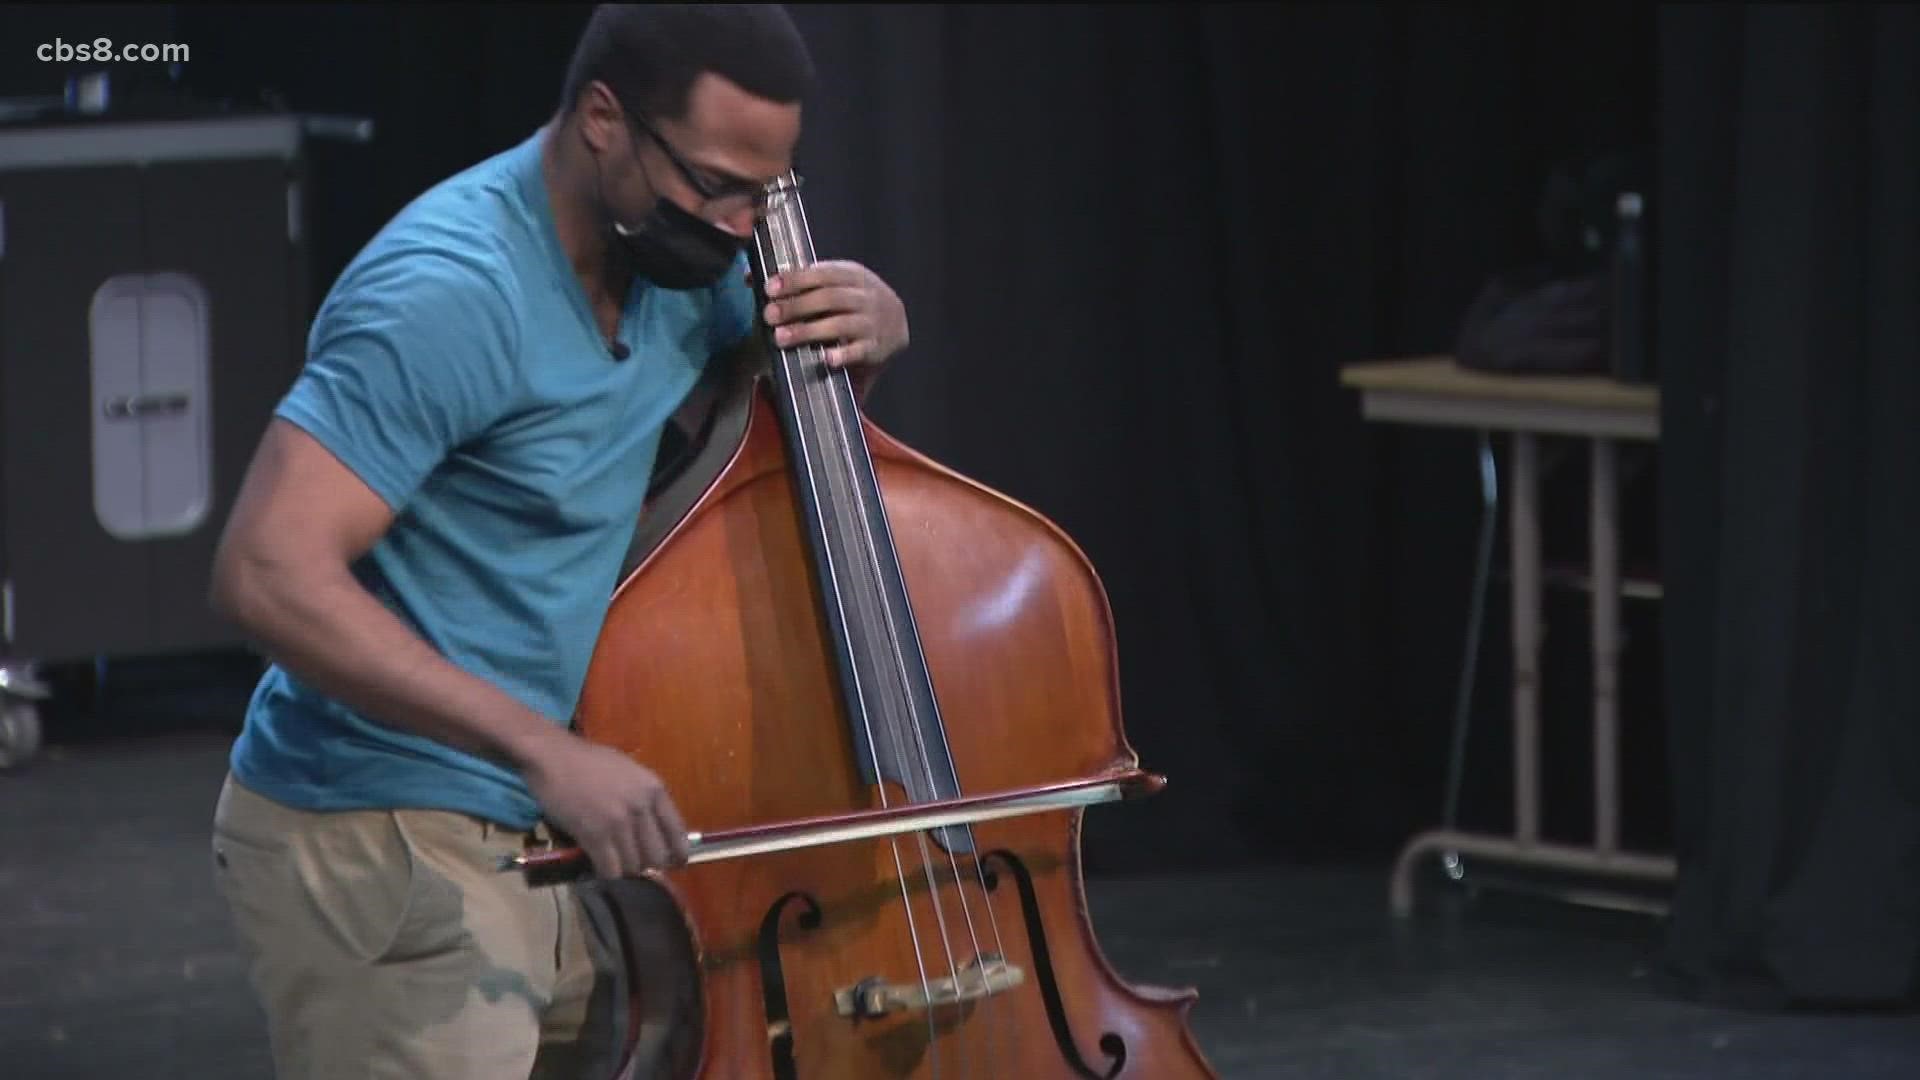 Double Bass virtuoso thought he could only play football or become a rapper until he found music.